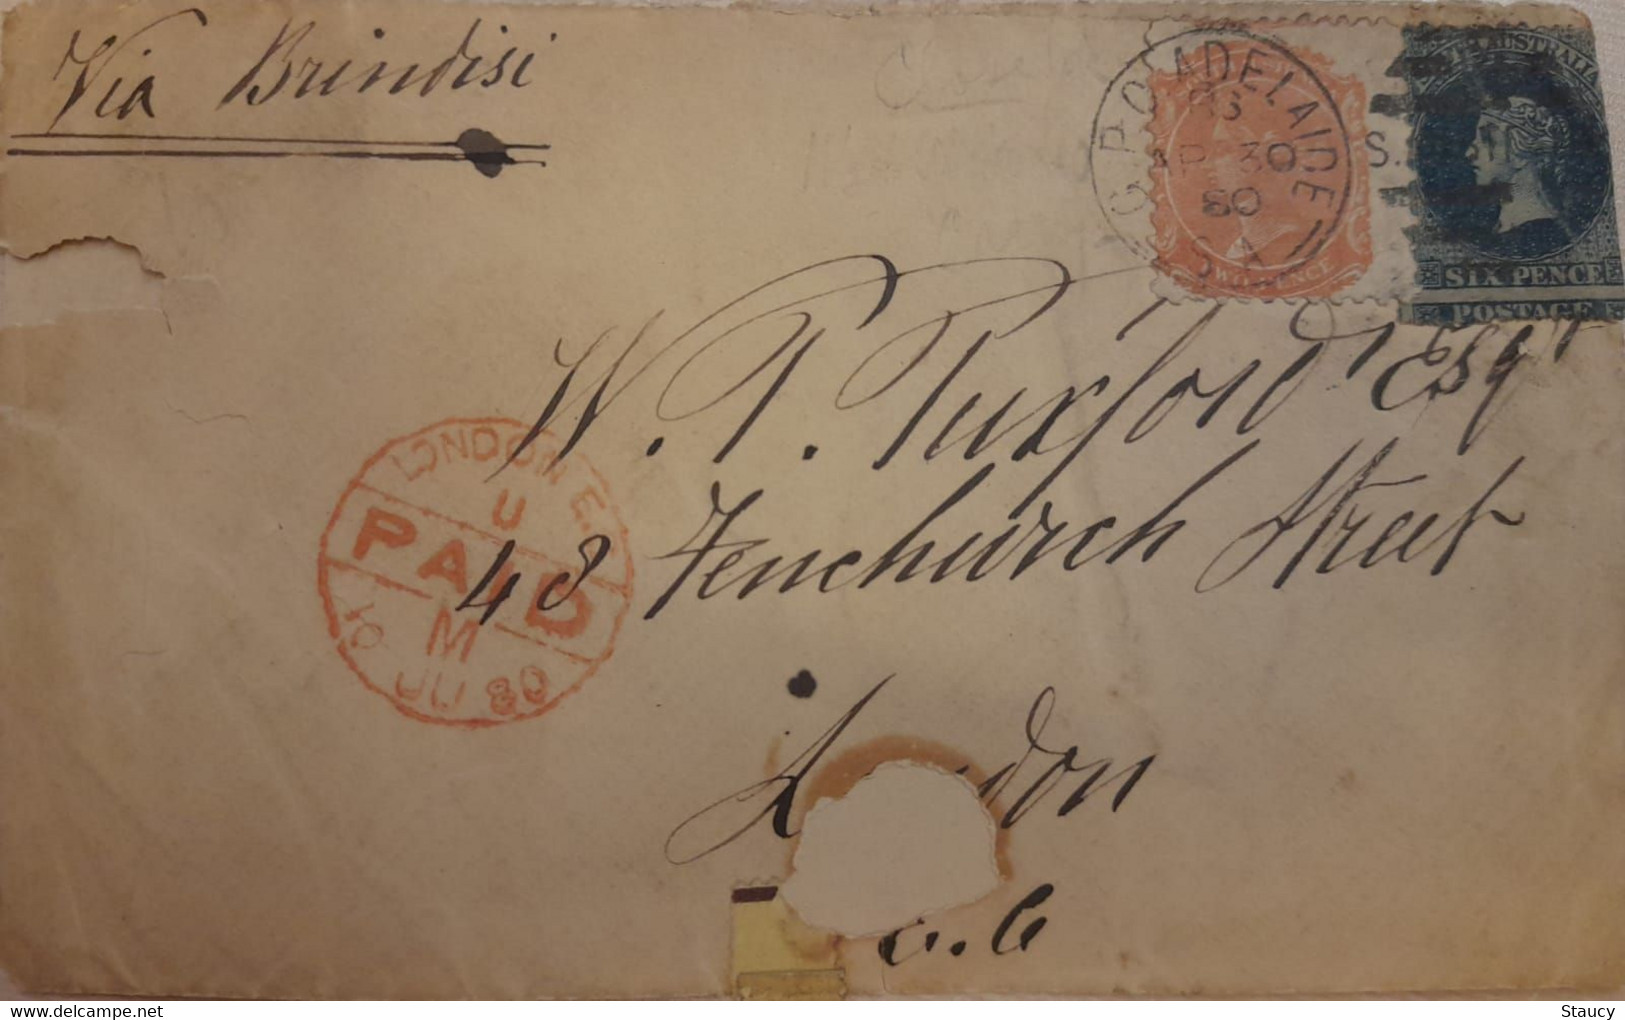 SOUTH AUSTRALIA 1880 QV 6d Blue + 2d ORANGE Franked On Cover Adelaide To LONDON Via Brindisi "LONDON PAID" As Per Scan - Lettres & Documents